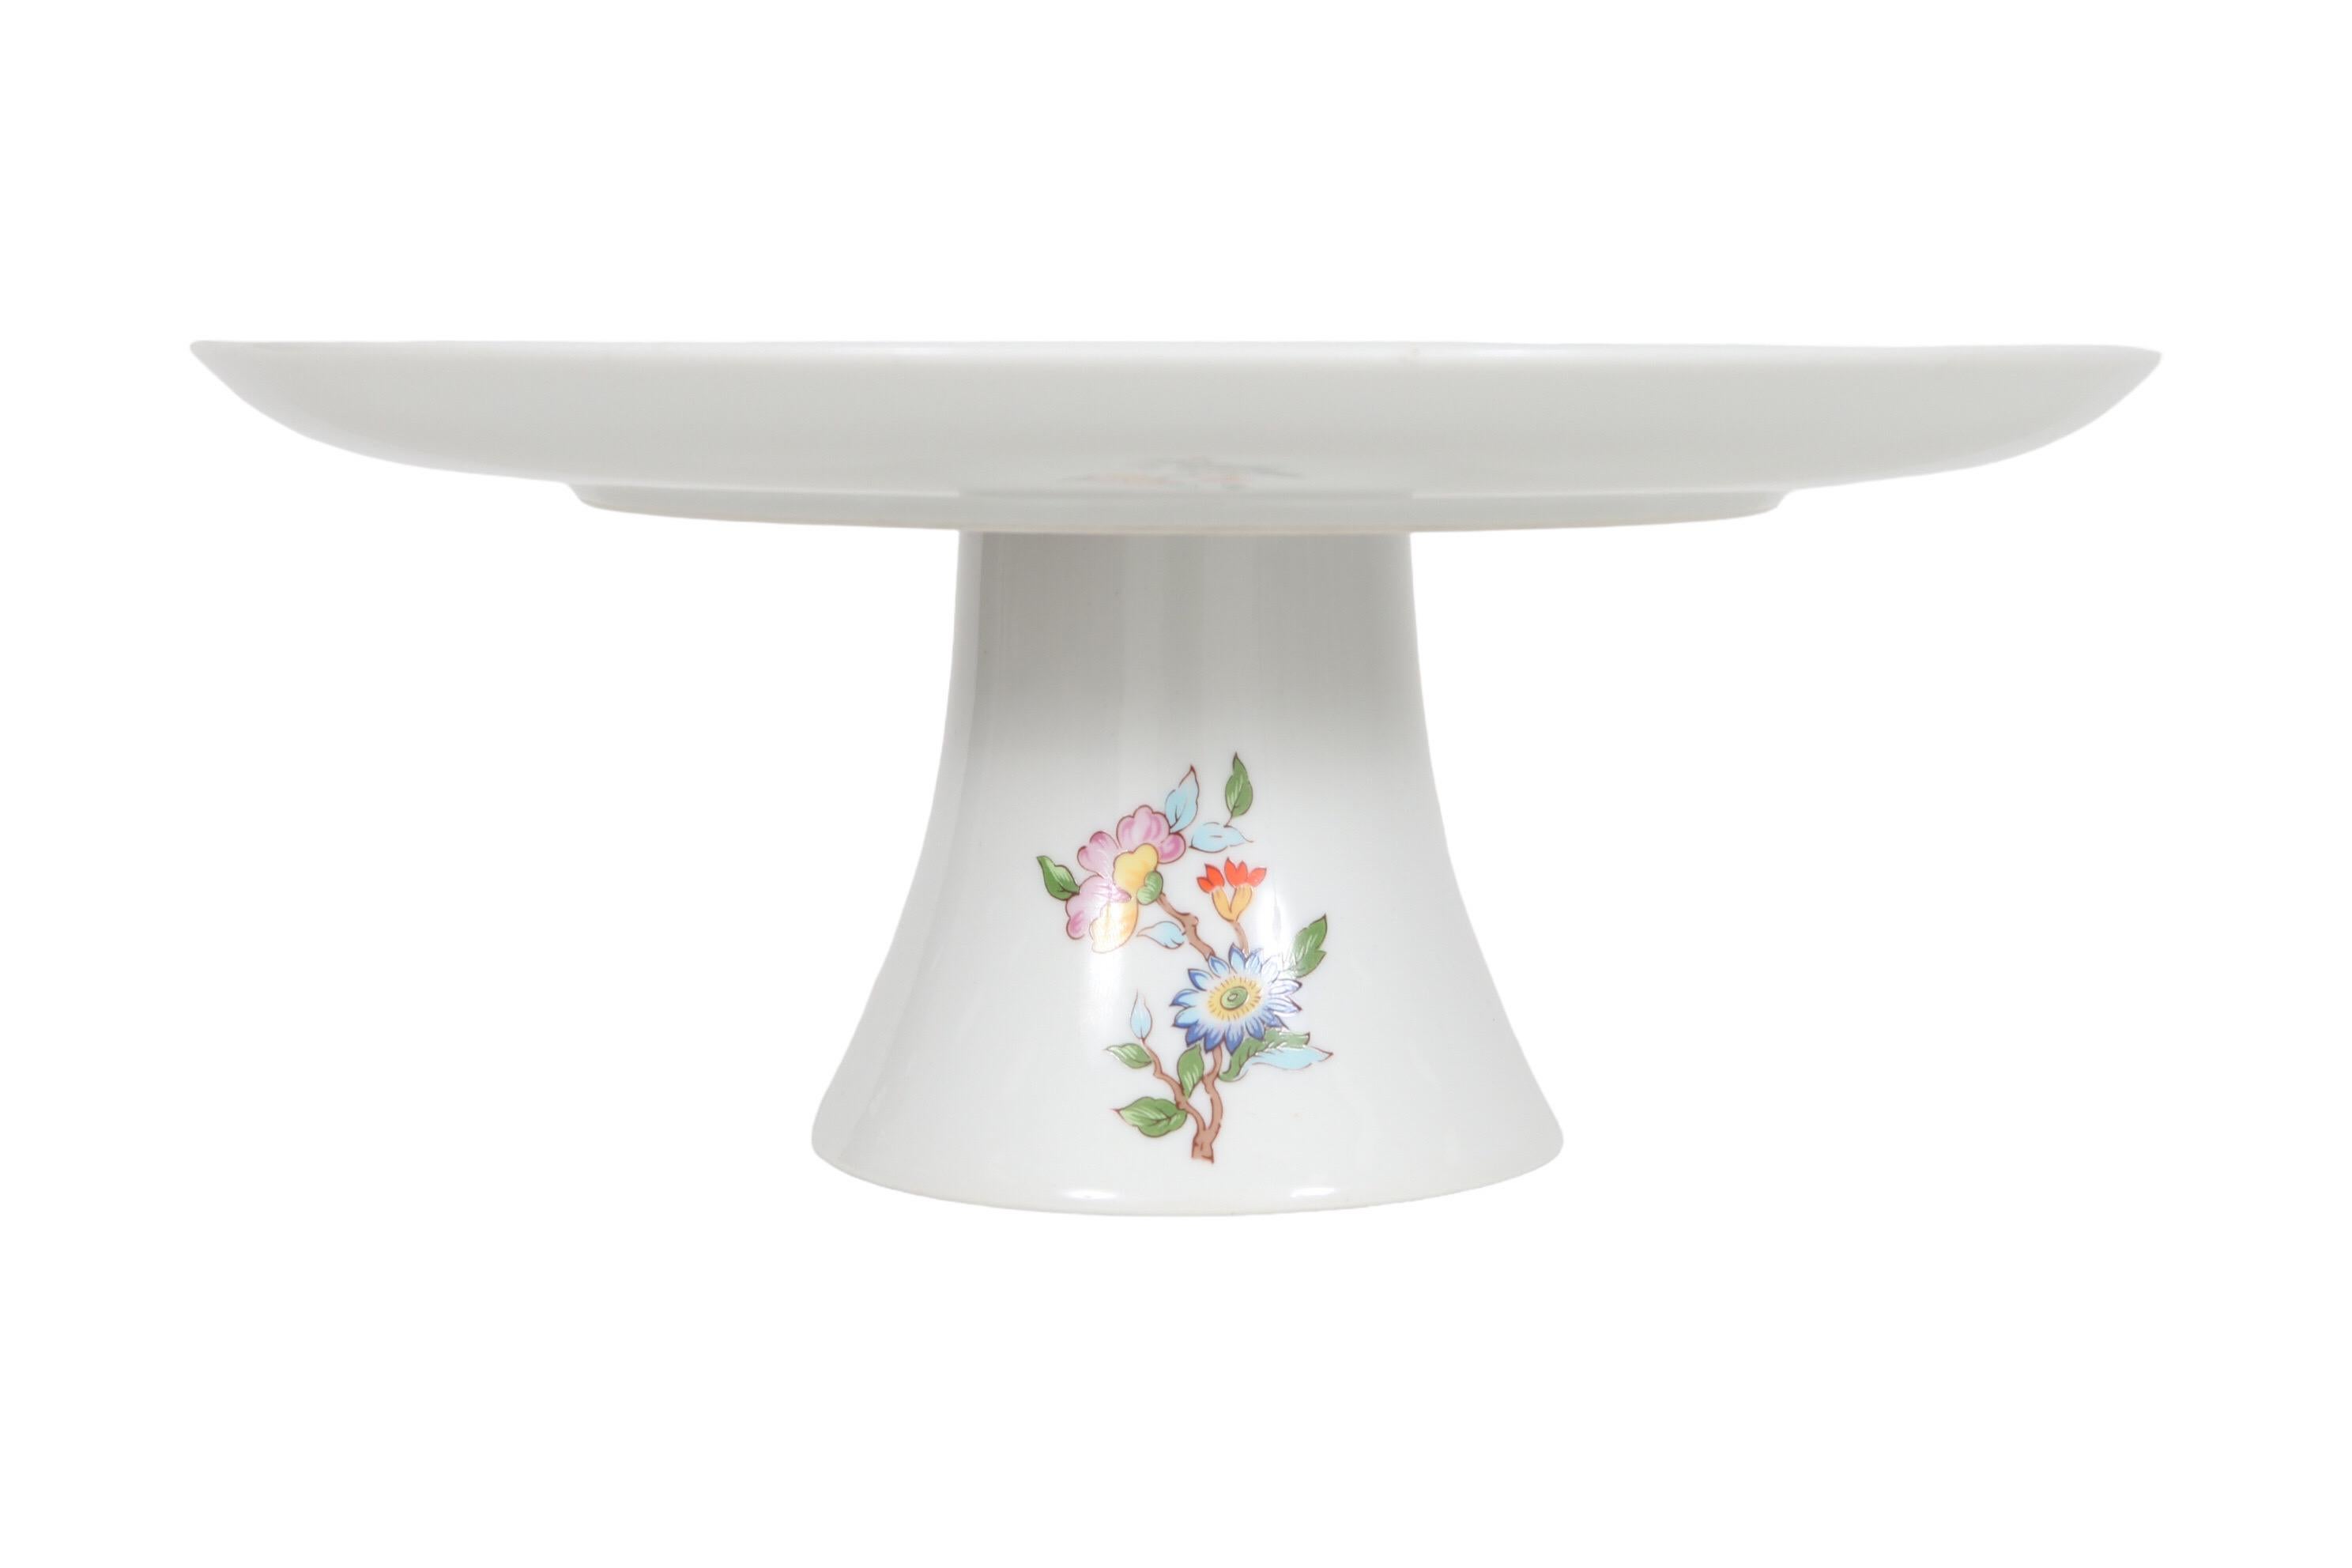 A white porcelain pedestal cake stand in the Le Jardin pattern, made by Dolphin Fine China of Japan. Decorated with delicately painted and brightly colored pink, blue and orange flowers amid intertwining foliage on the plate, and with bouquets of